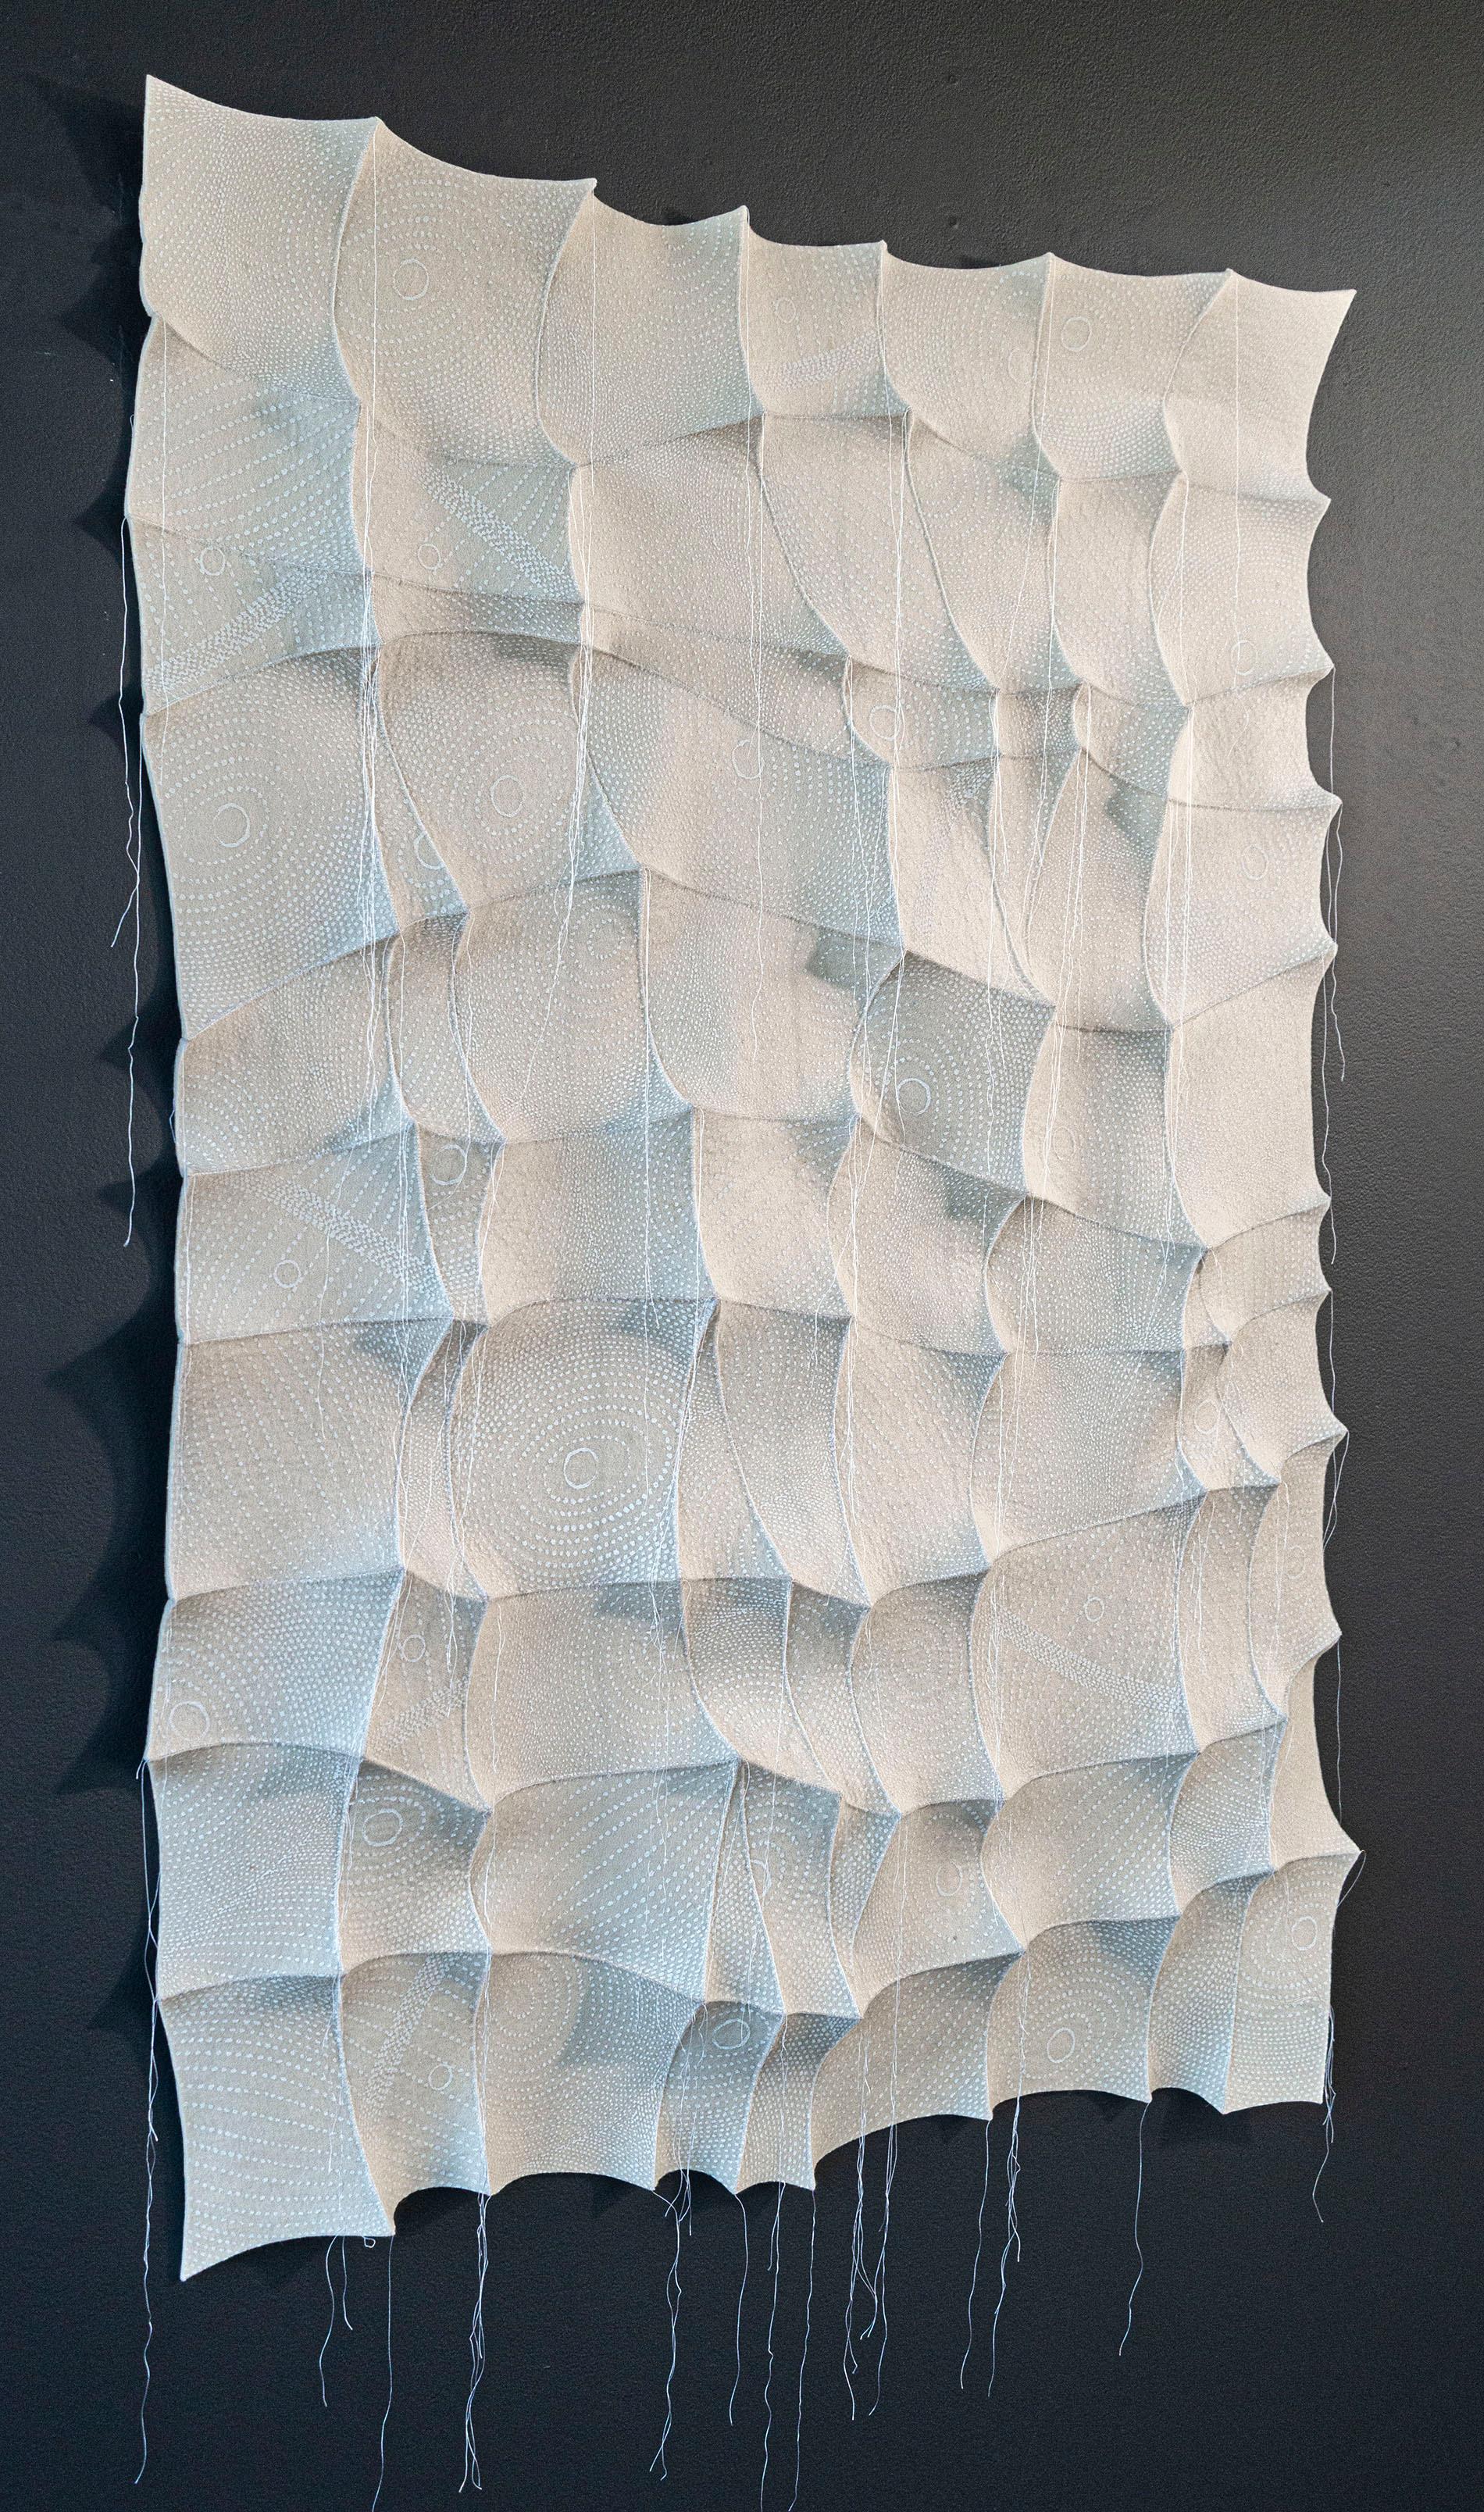 New Dawn - white, textured, biomorphic, abstract, industrial felt wall sculpture - Contemporary Mixed Media Art by Chung-Im Kim